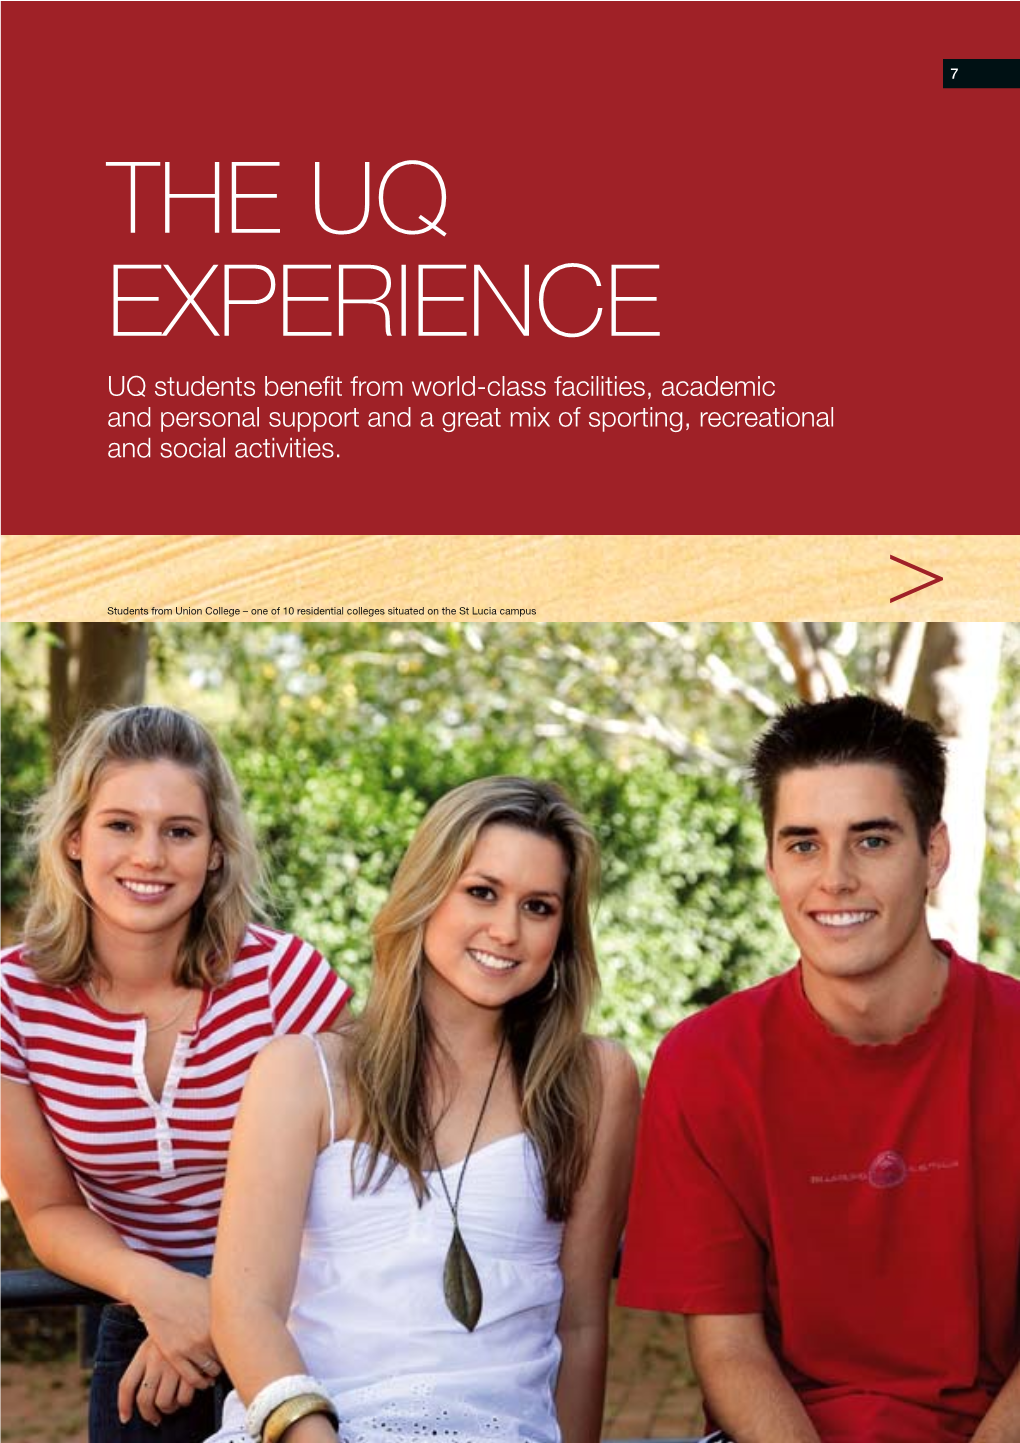 THE UQ EXPERIENCE UQ Students Beneﬁ T from World-Class Facilities, Academic and Personal Support and a Great Mix of Sporting, Recreational and Social Activities